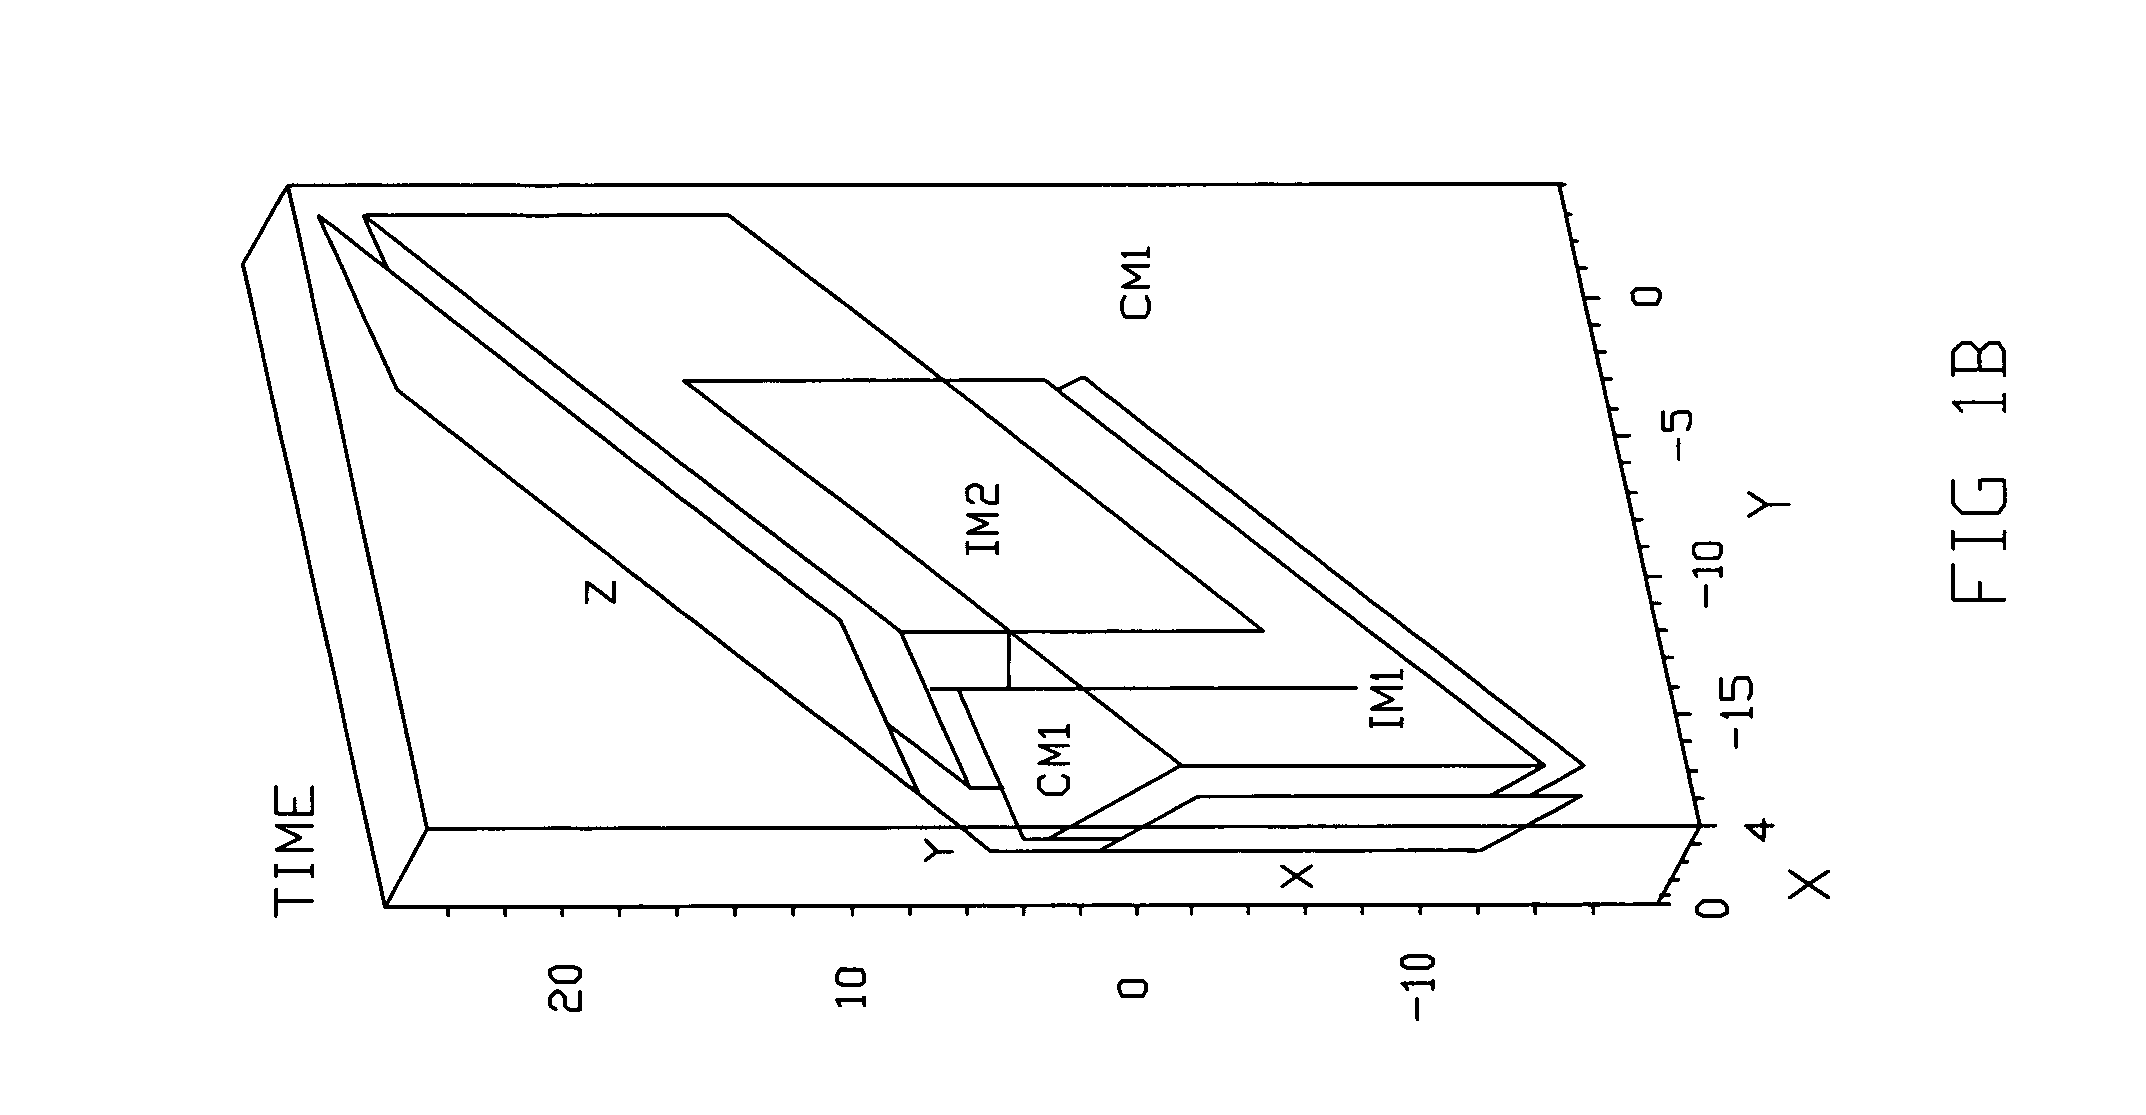 Digital systolic array architecture and method for computing the discrete Fourier transform